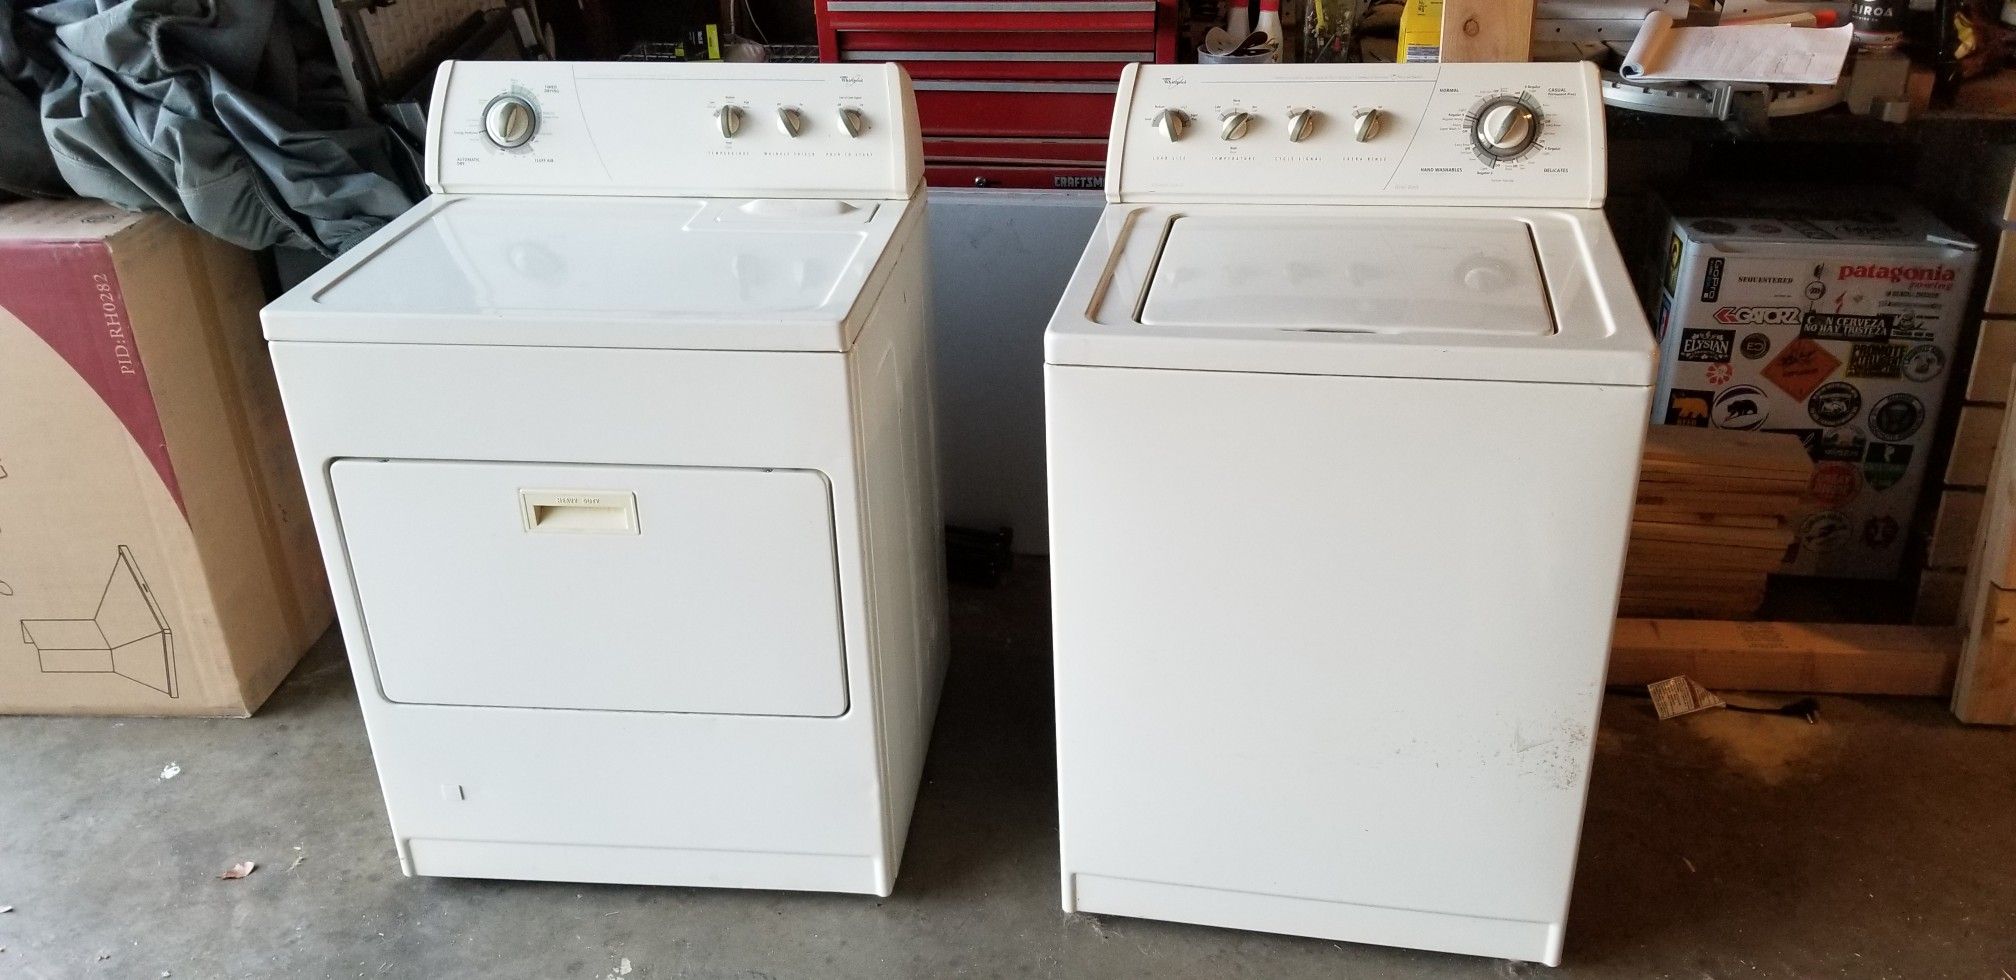 Washer and Dryer - Whirlpool